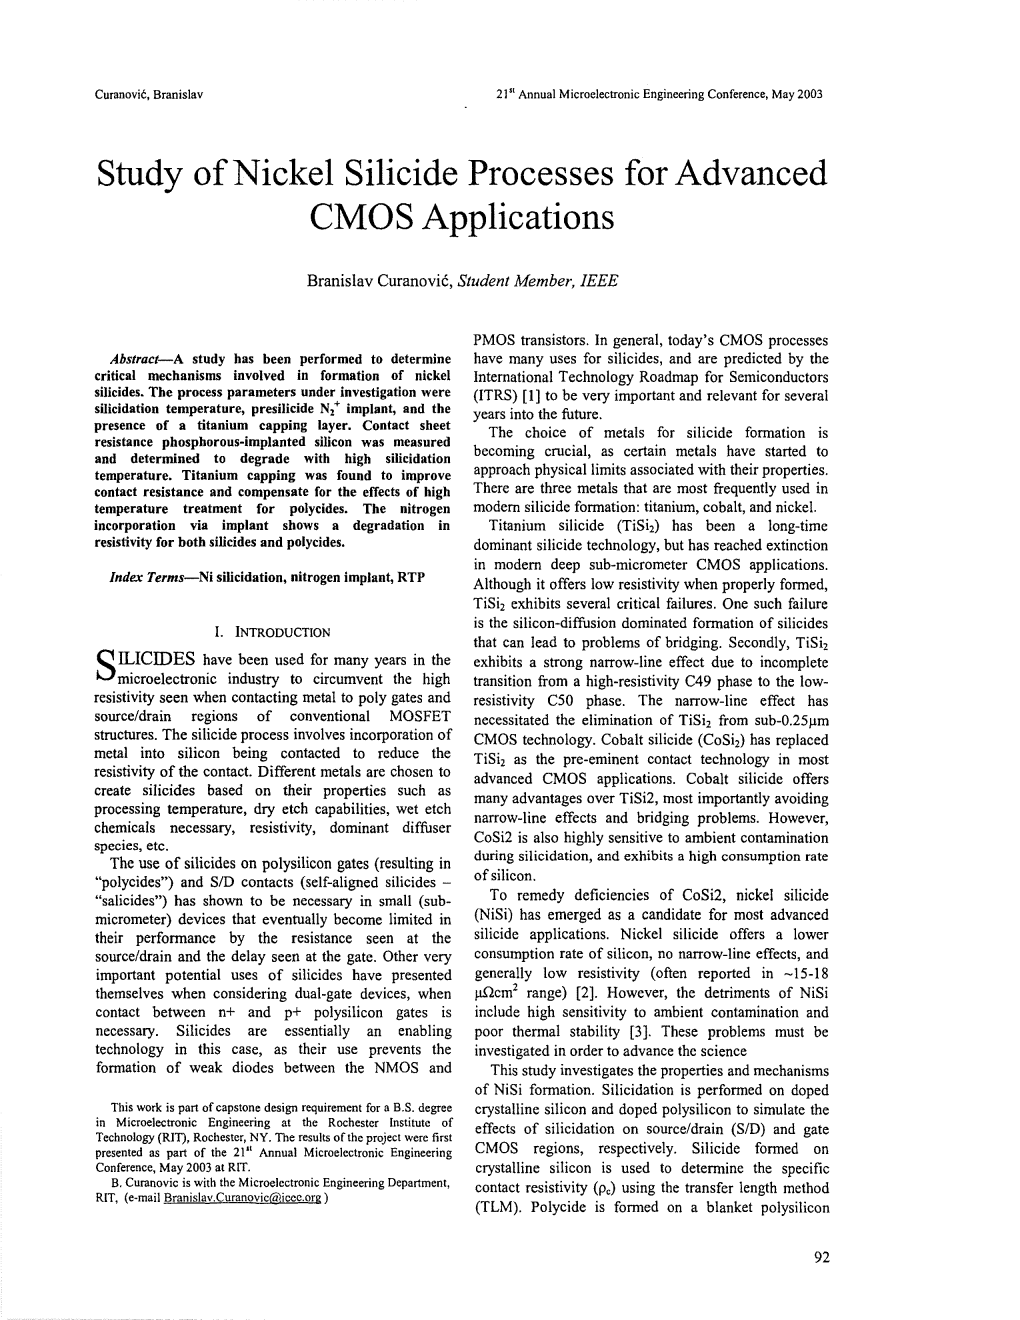 Study of Nickel Silicide Processes for Advanced CMOS Applications